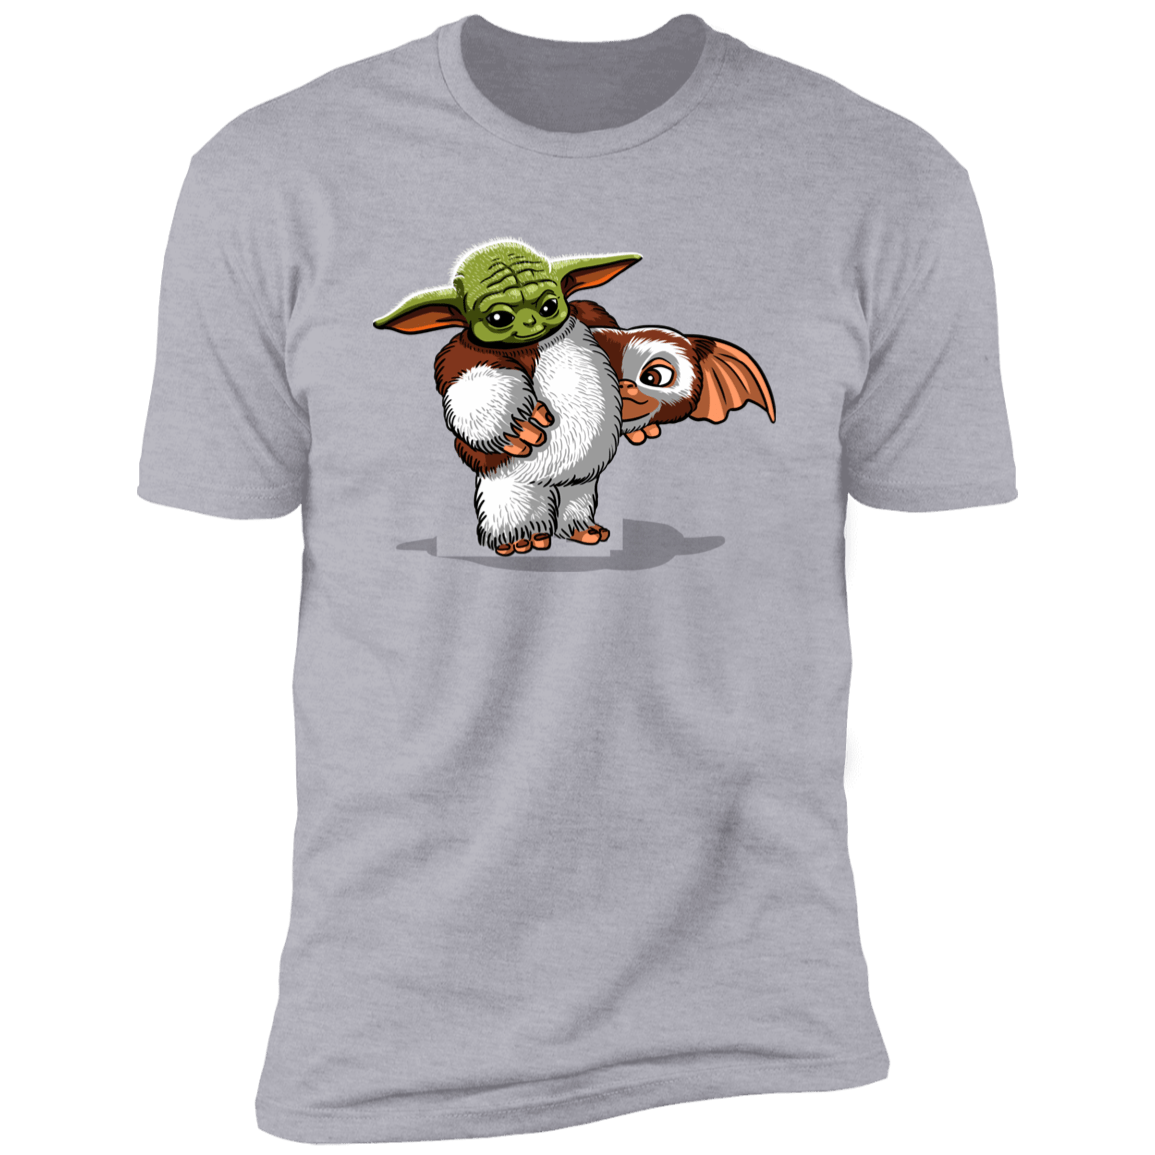 T-Shirts Heather Grey / S Baby in Disguise Men's Premium T-Shirt